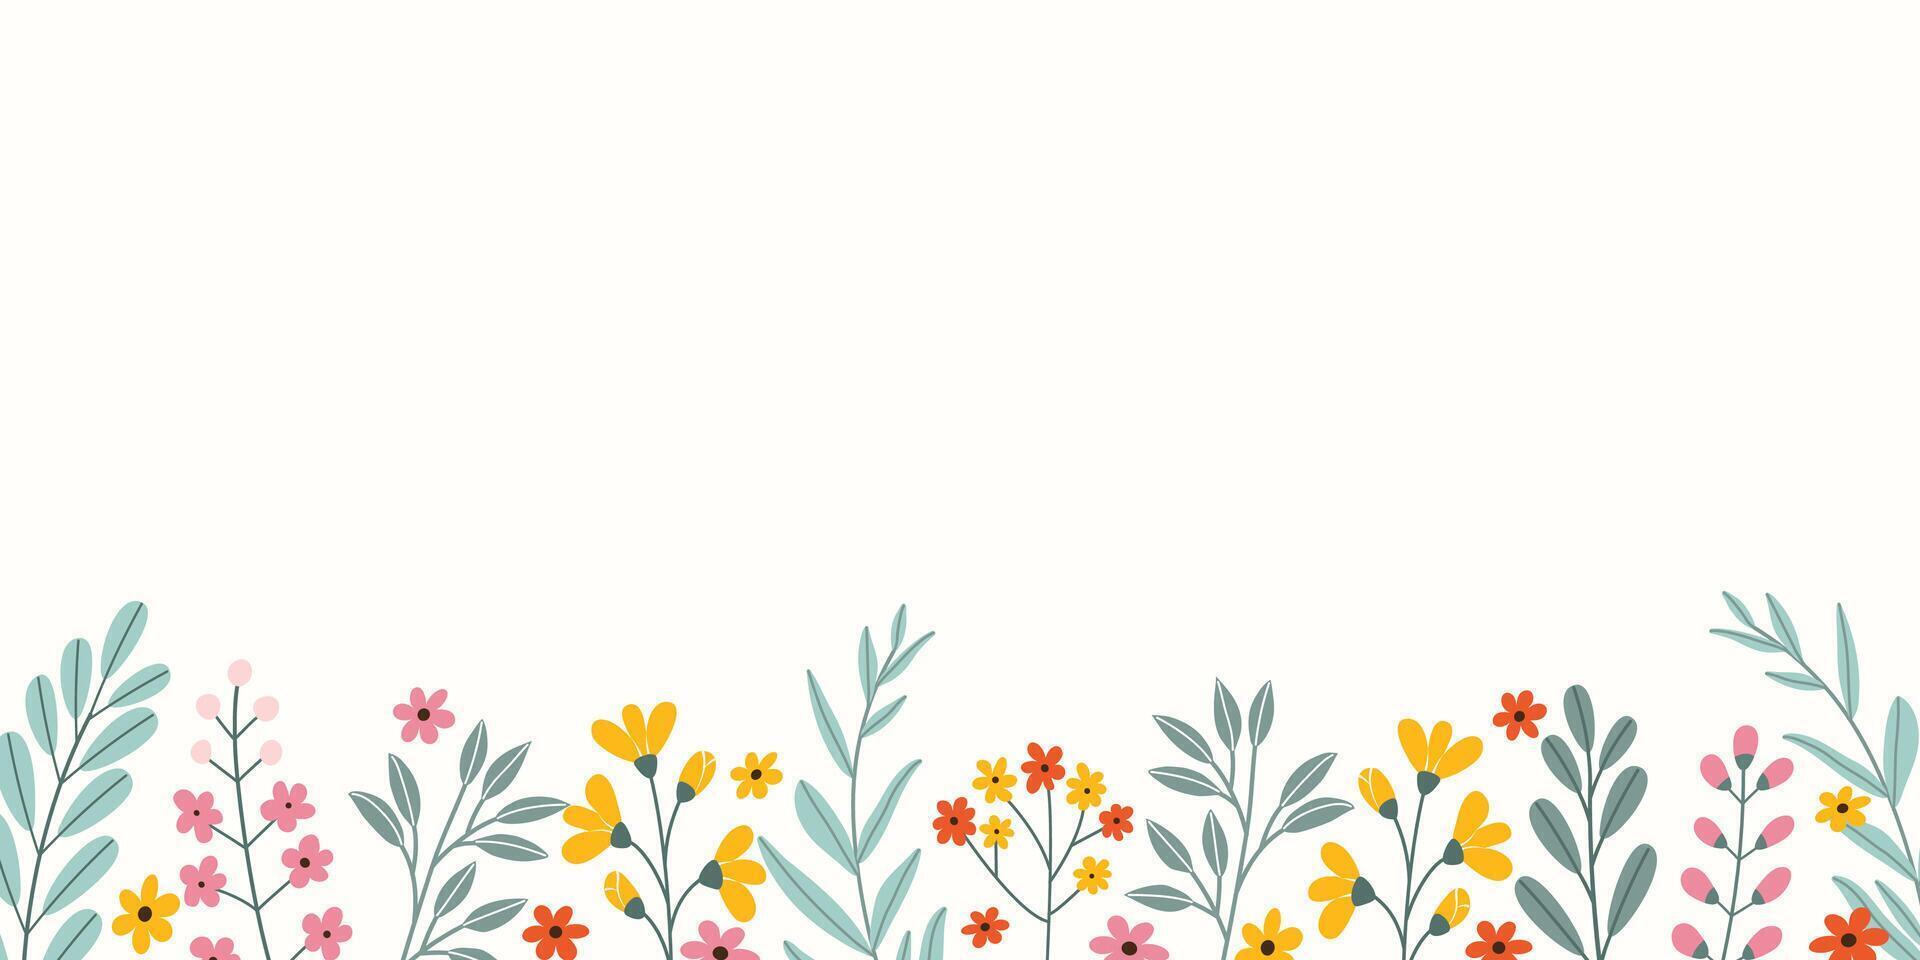 Spring rectangular celebration background with empty place for text in flat style. Hand drawn different colorful flowers and branches. Holiday seasonal floral template. vector